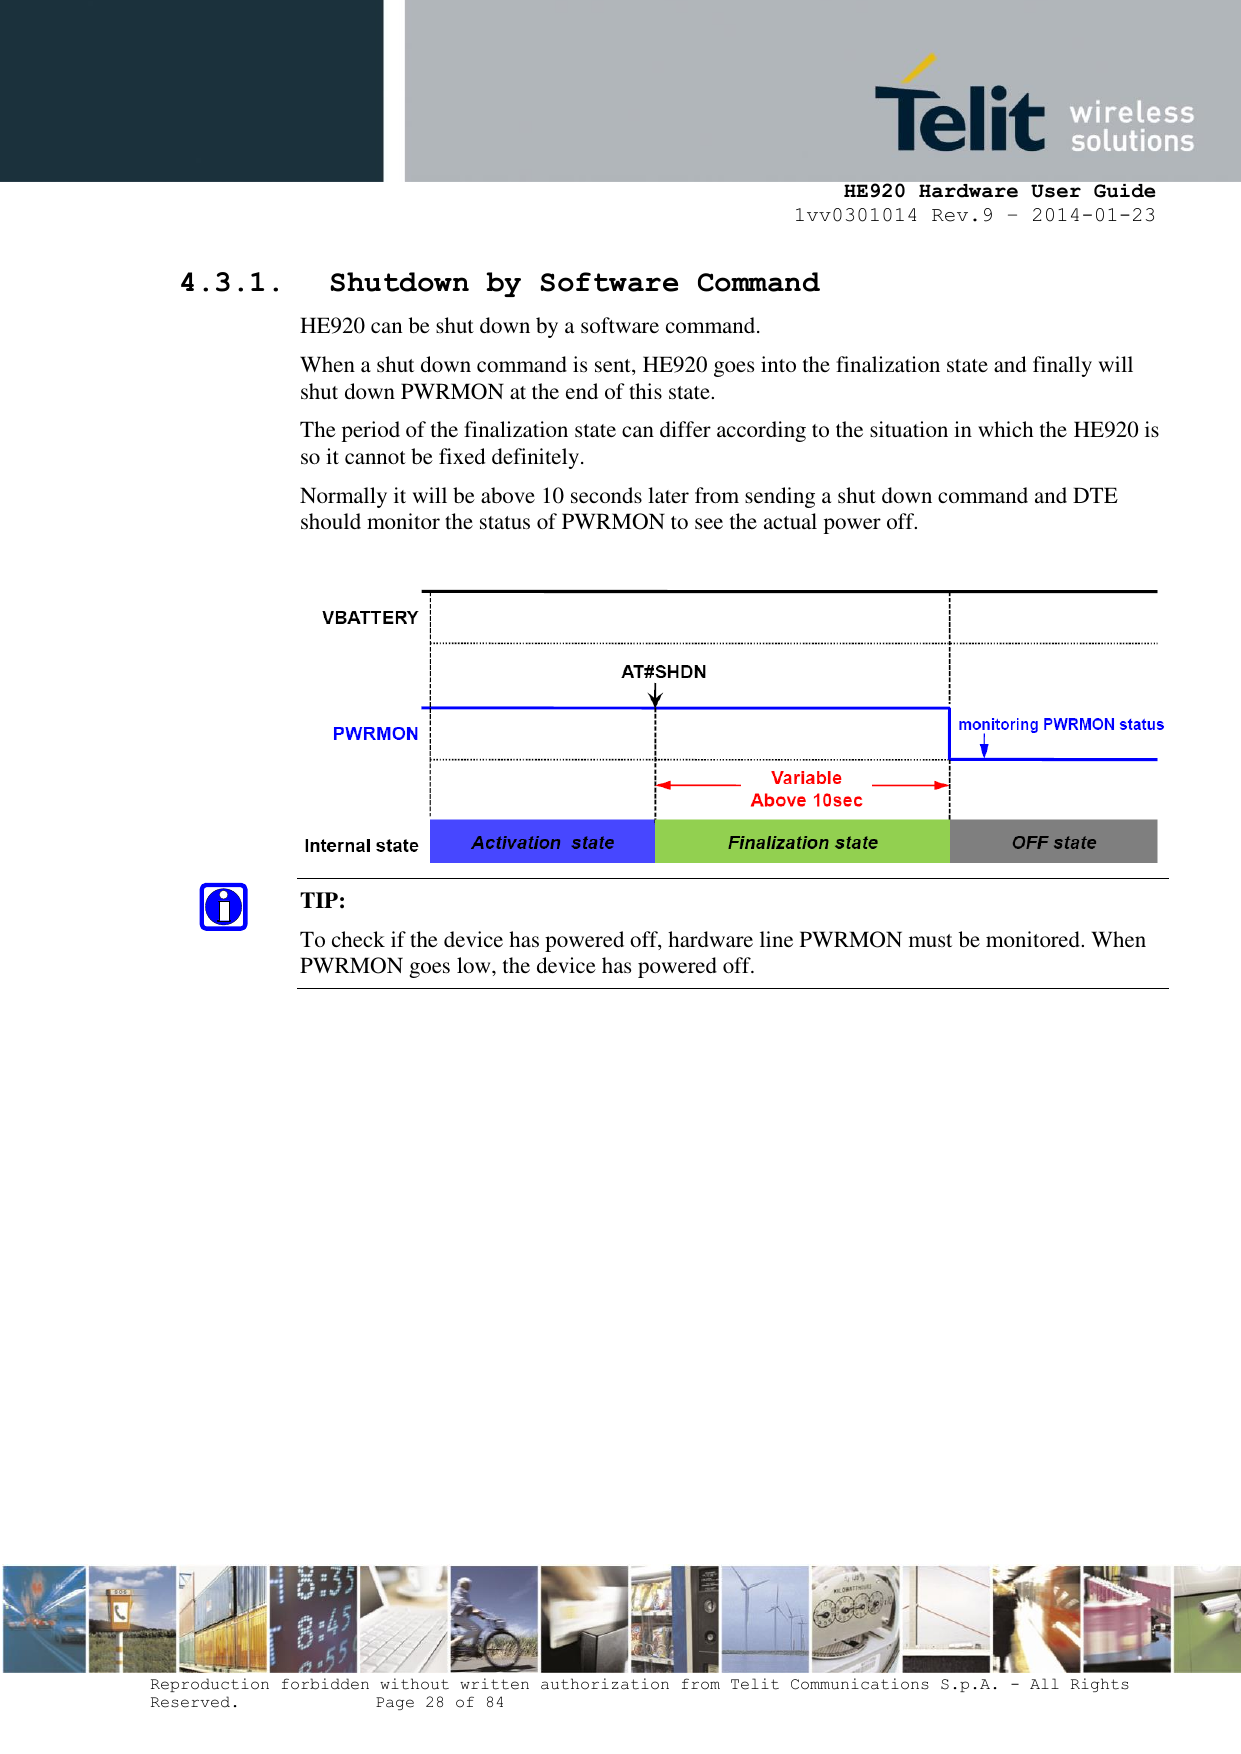     HE920 Hardware User Guide 1vv0301014 Rev.9 – 2014-01-23 Reproduction forbidden without written authorization from Telit Communications S.p.A. - All Rights Reserved.    Page 28 of 84  4.3.1. Shutdown by Software Command HE920 can be shut down by a software command. When a shut down command is sent, HE920 goes into the finalization state and finally will shut down PWRMON at the end of this state. The period of the finalization state can differ according to the situation in which the HE920 is so it cannot be fixed definitely. Normally it will be above 10 seconds later from sending a shut down command and DTE should monitor the status of PWRMON to see the actual power off.   TIP:  To check if the device has powered off, hardware line PWRMON must be monitored. When PWRMON goes low, the device has powered off.  